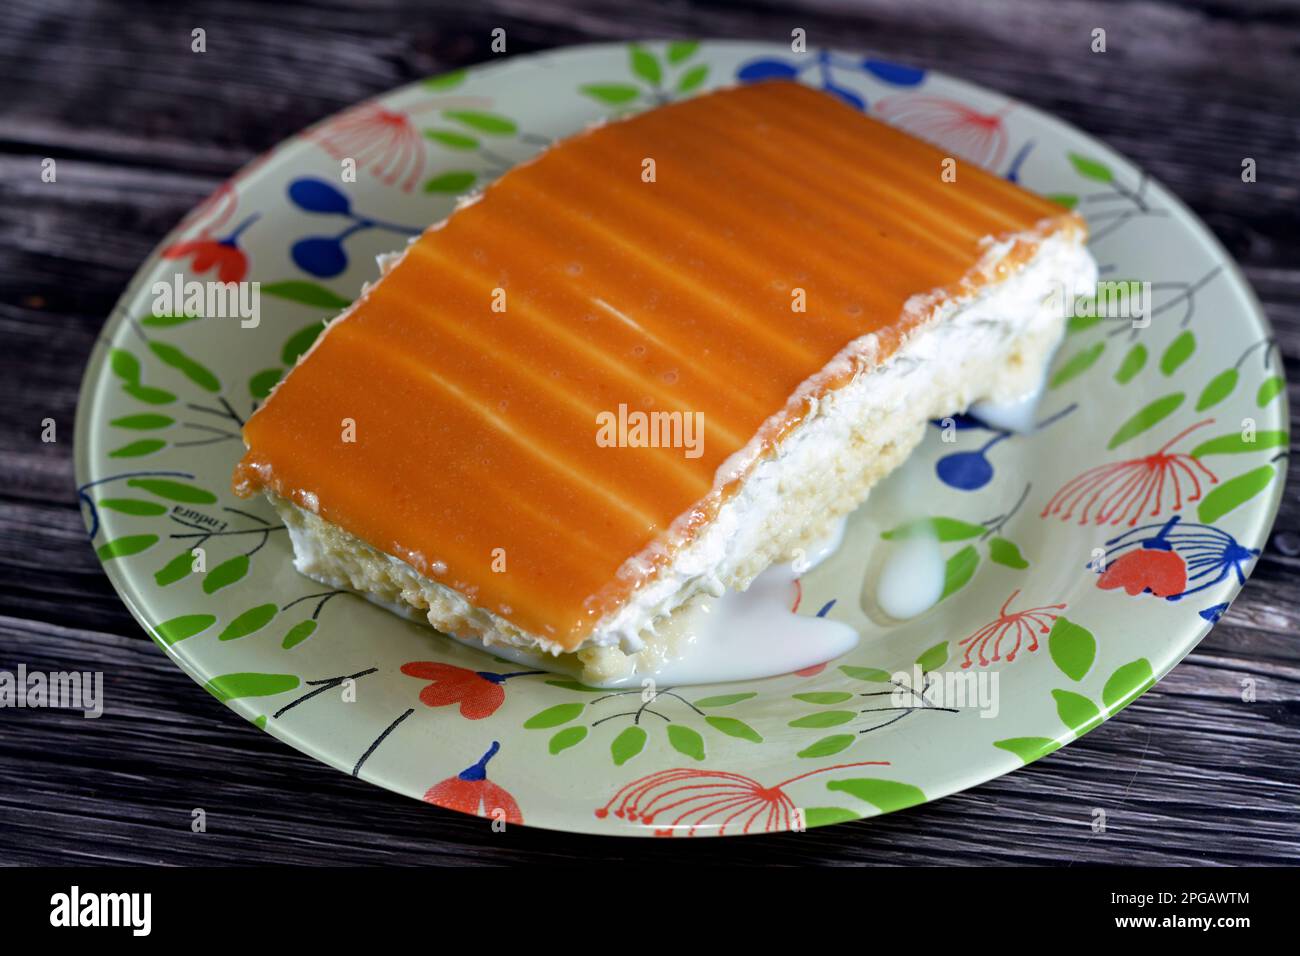 A tres leches cake, pan tres leches, a sponge cake soaked in three kinds of milk, evaporated, condensed and whole milk, covered with whipped cream and Stock Photo